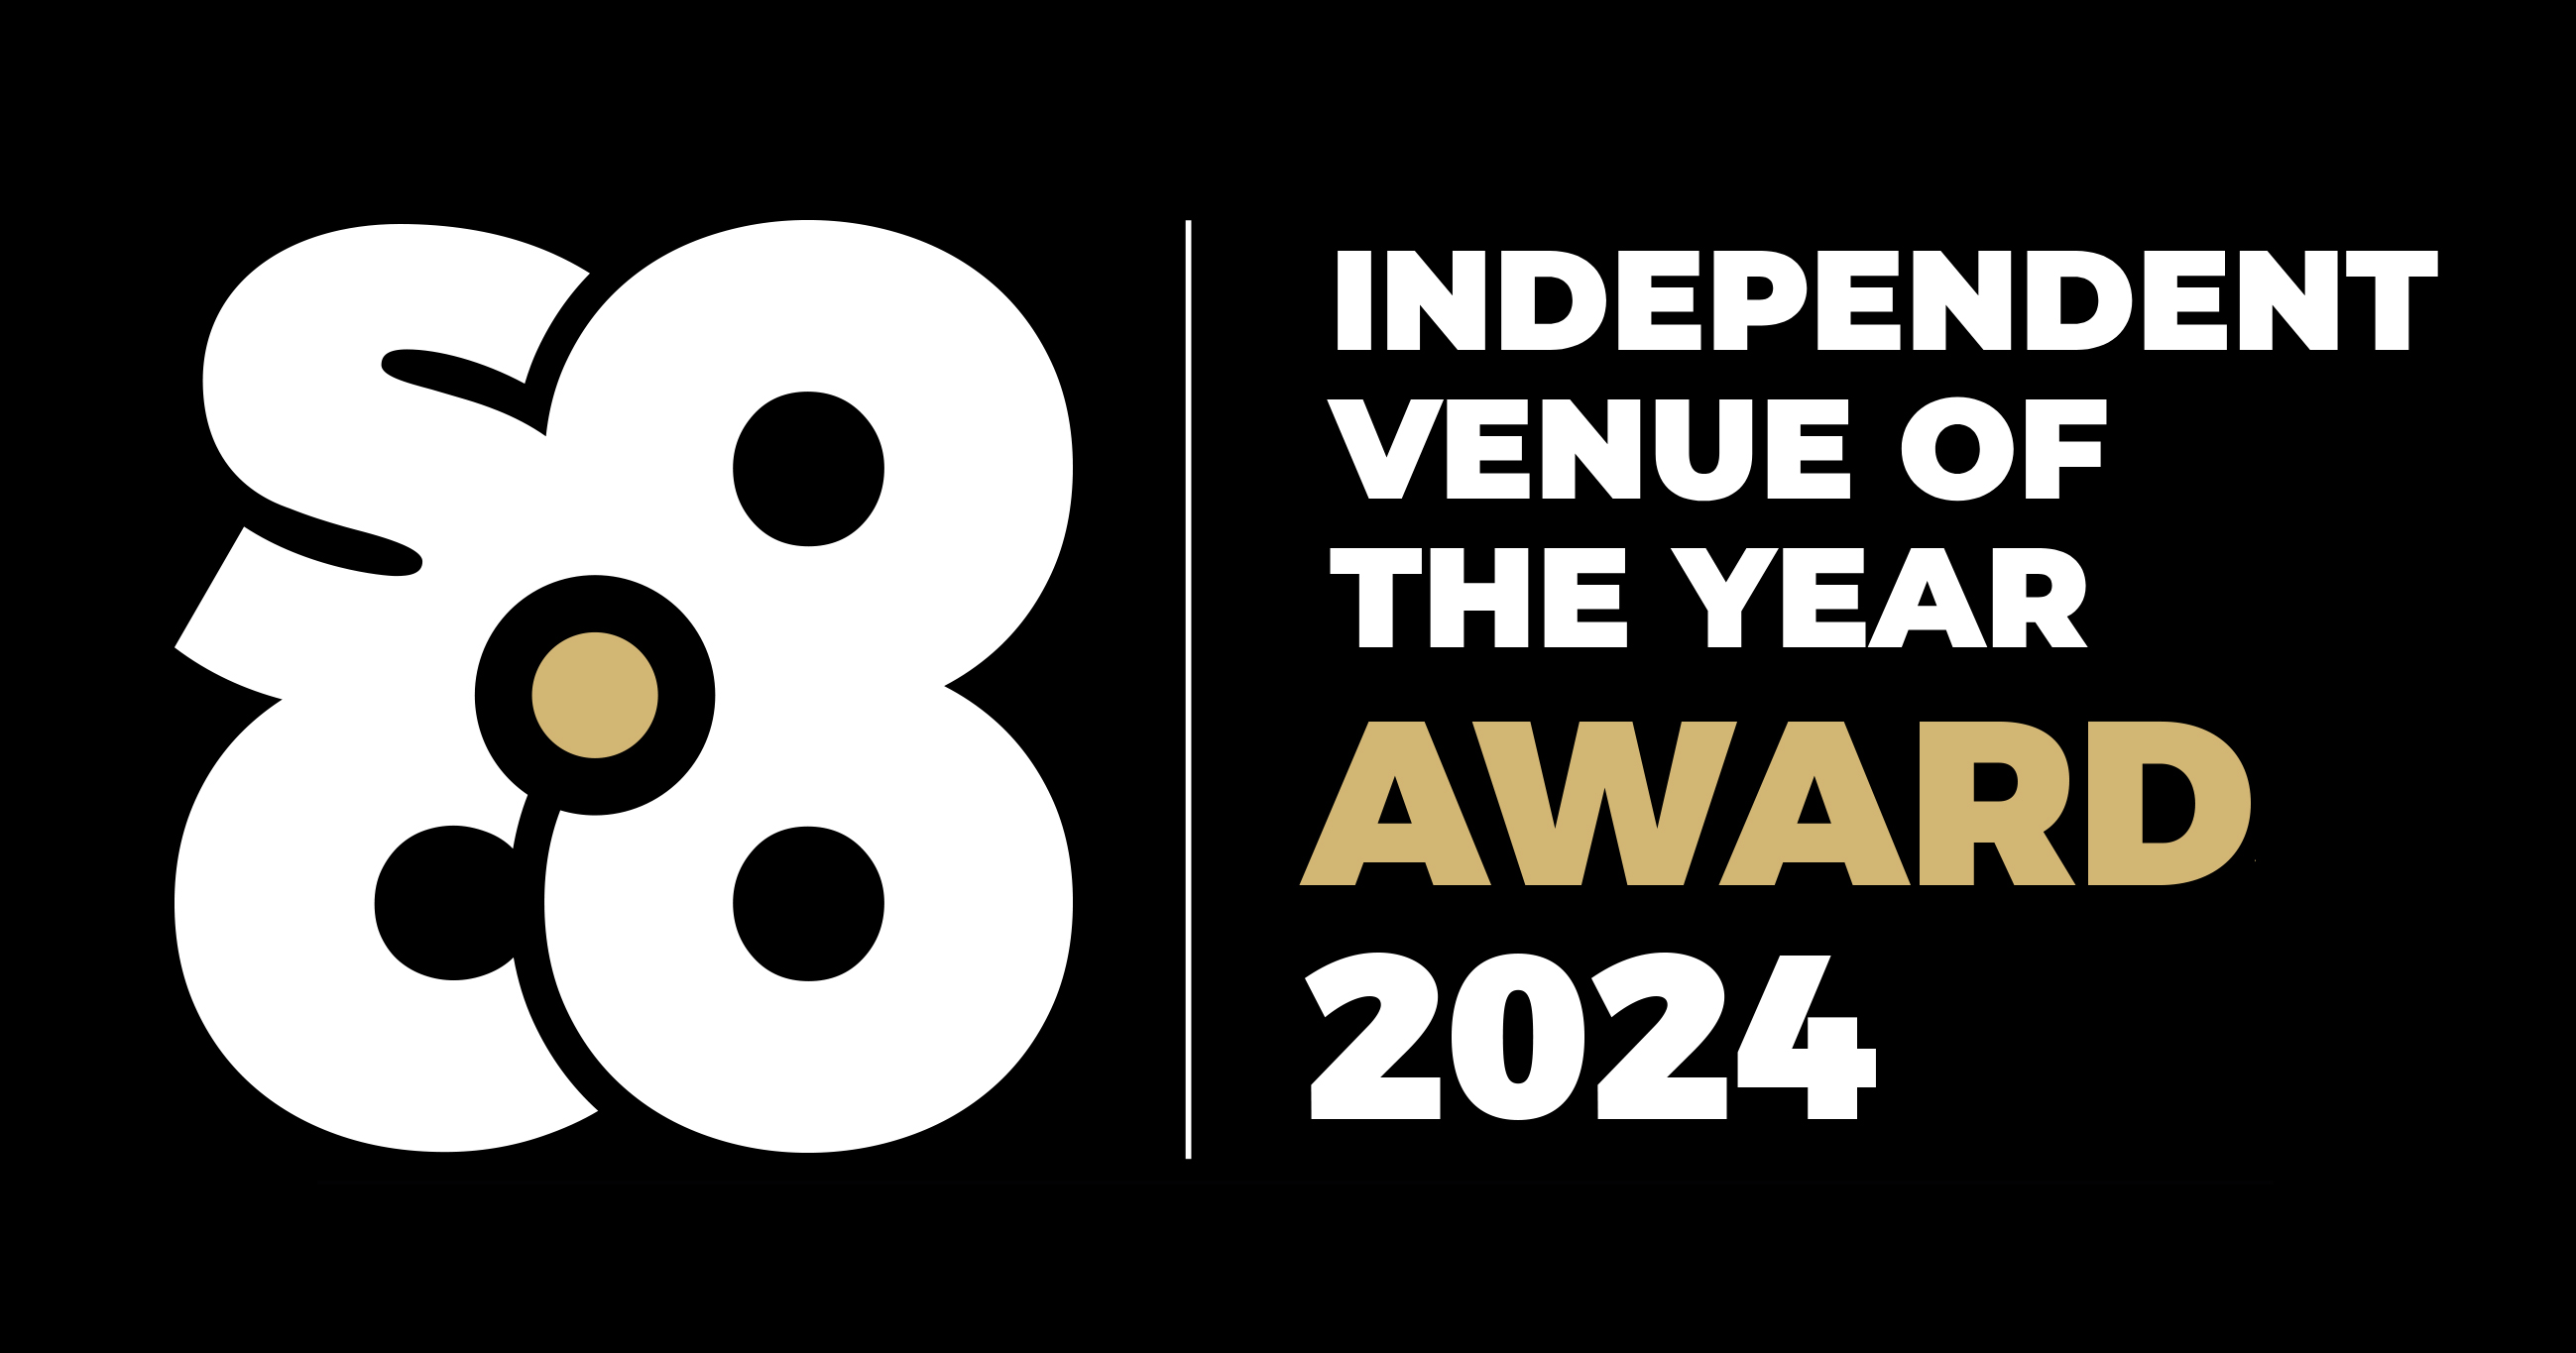 Independent Venue of the Year 2024 award